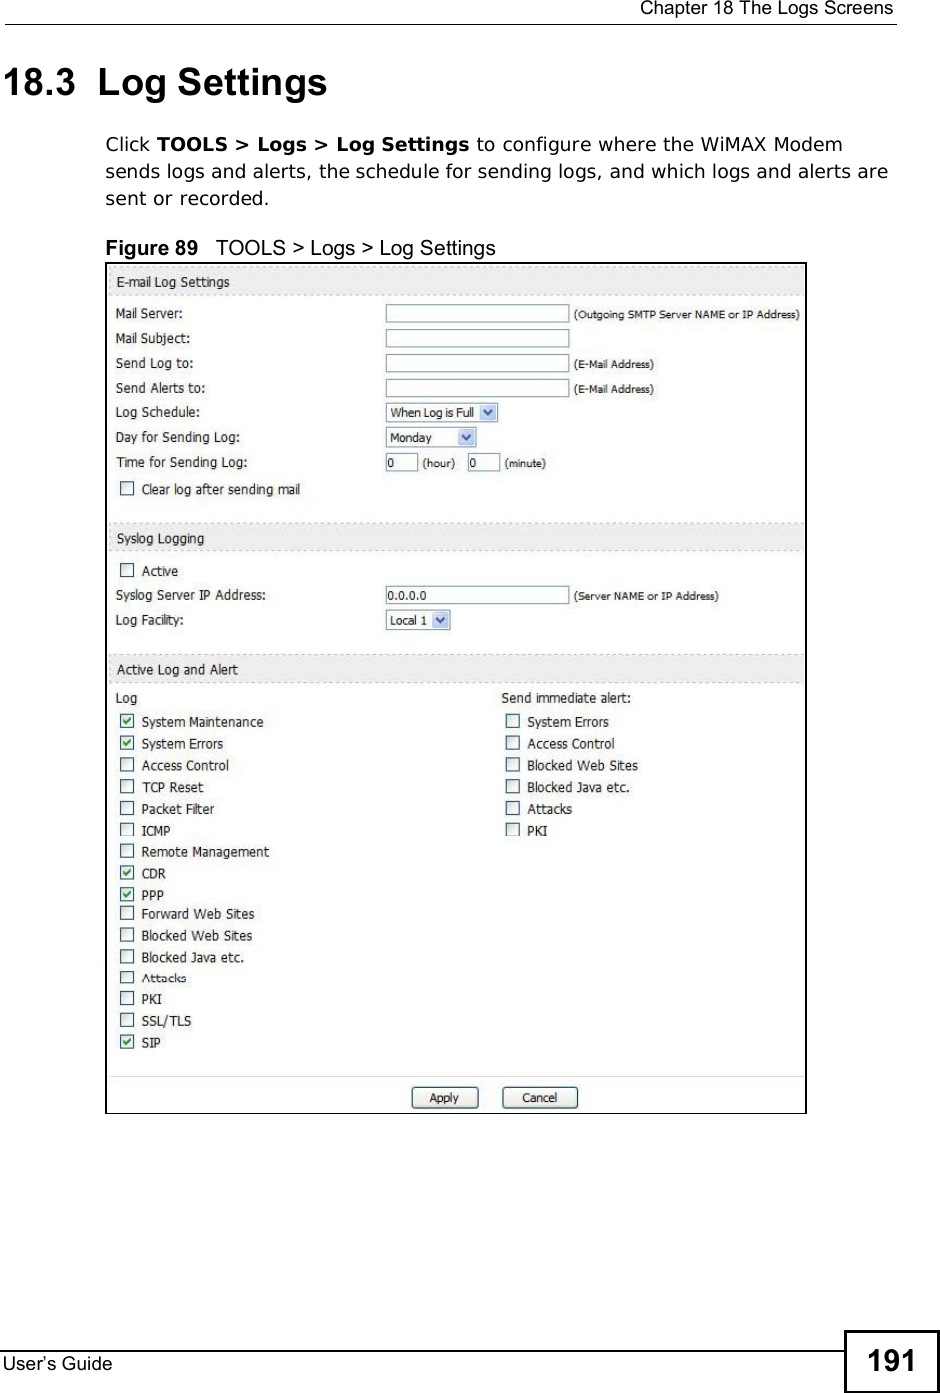  Chapter 18The Logs ScreensUser s Guide 19118.3  Log SettingsClick TOOLS &gt; Logs &gt; Log Settings to configure where the WiMAX Modem sends logs and alerts, the schedule for sending logs, and which logs and alerts are sent or recorded.Figure 89   TOOLS &gt; Logs &gt; Log Settings